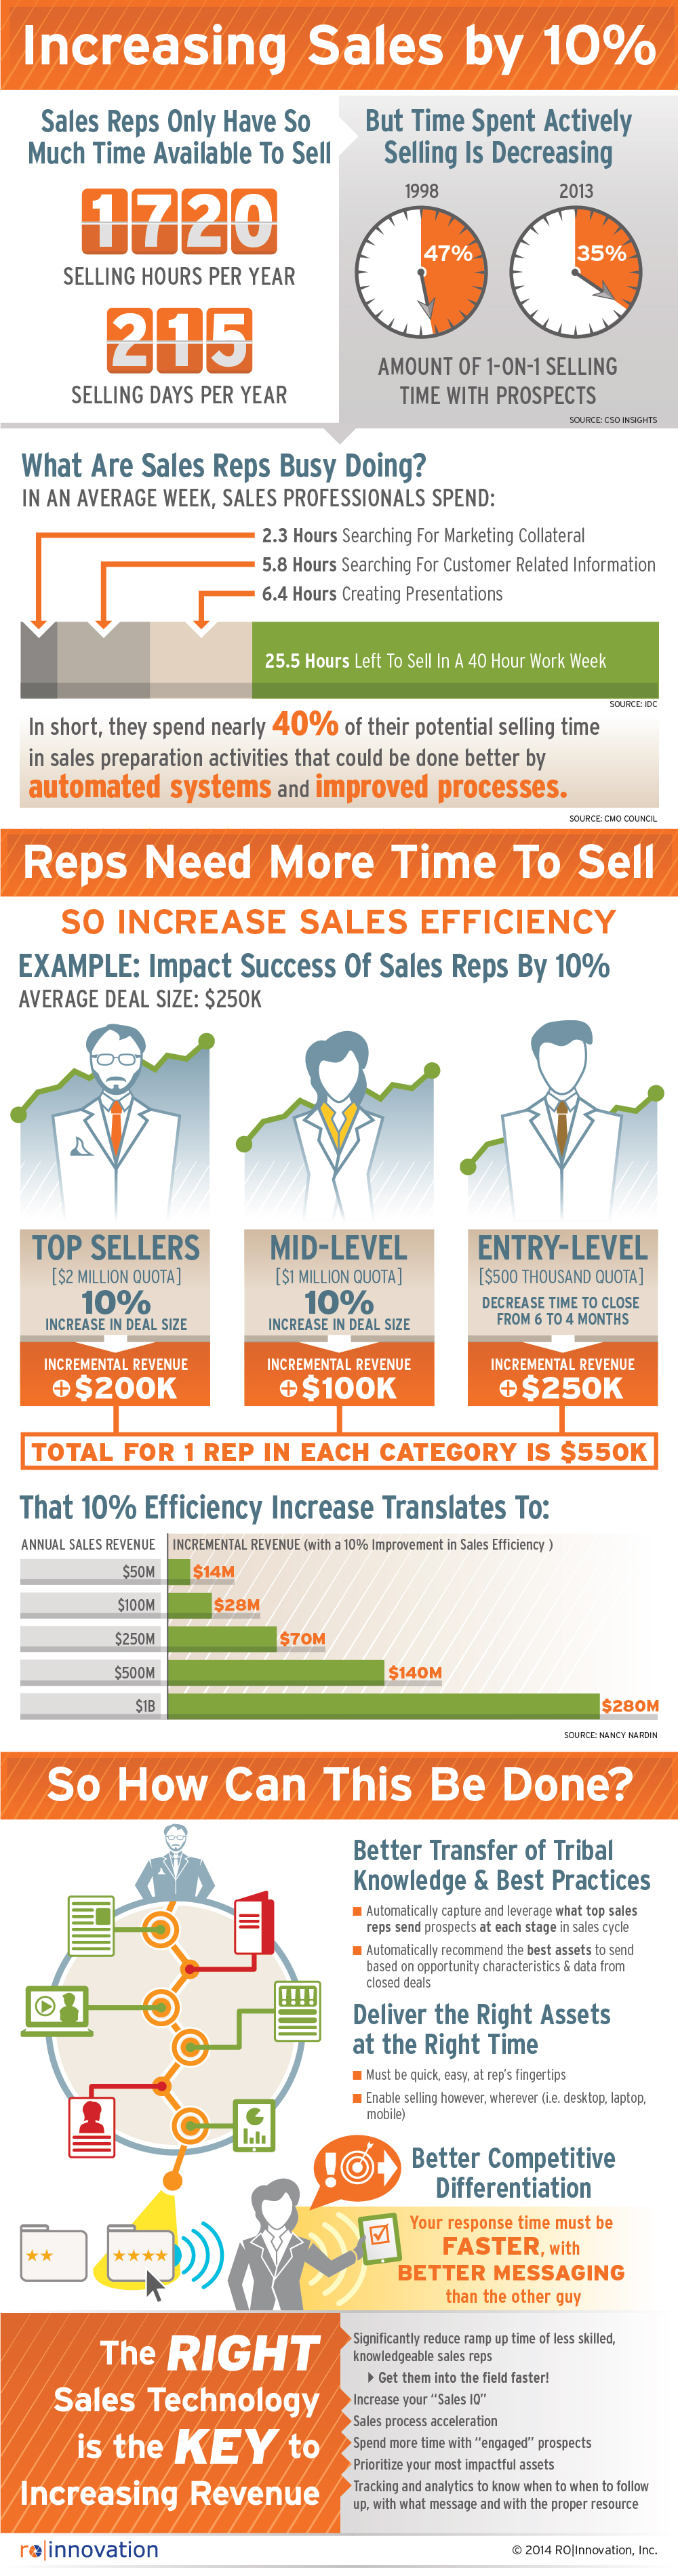 The Sales Rep's Motto [Infographic]